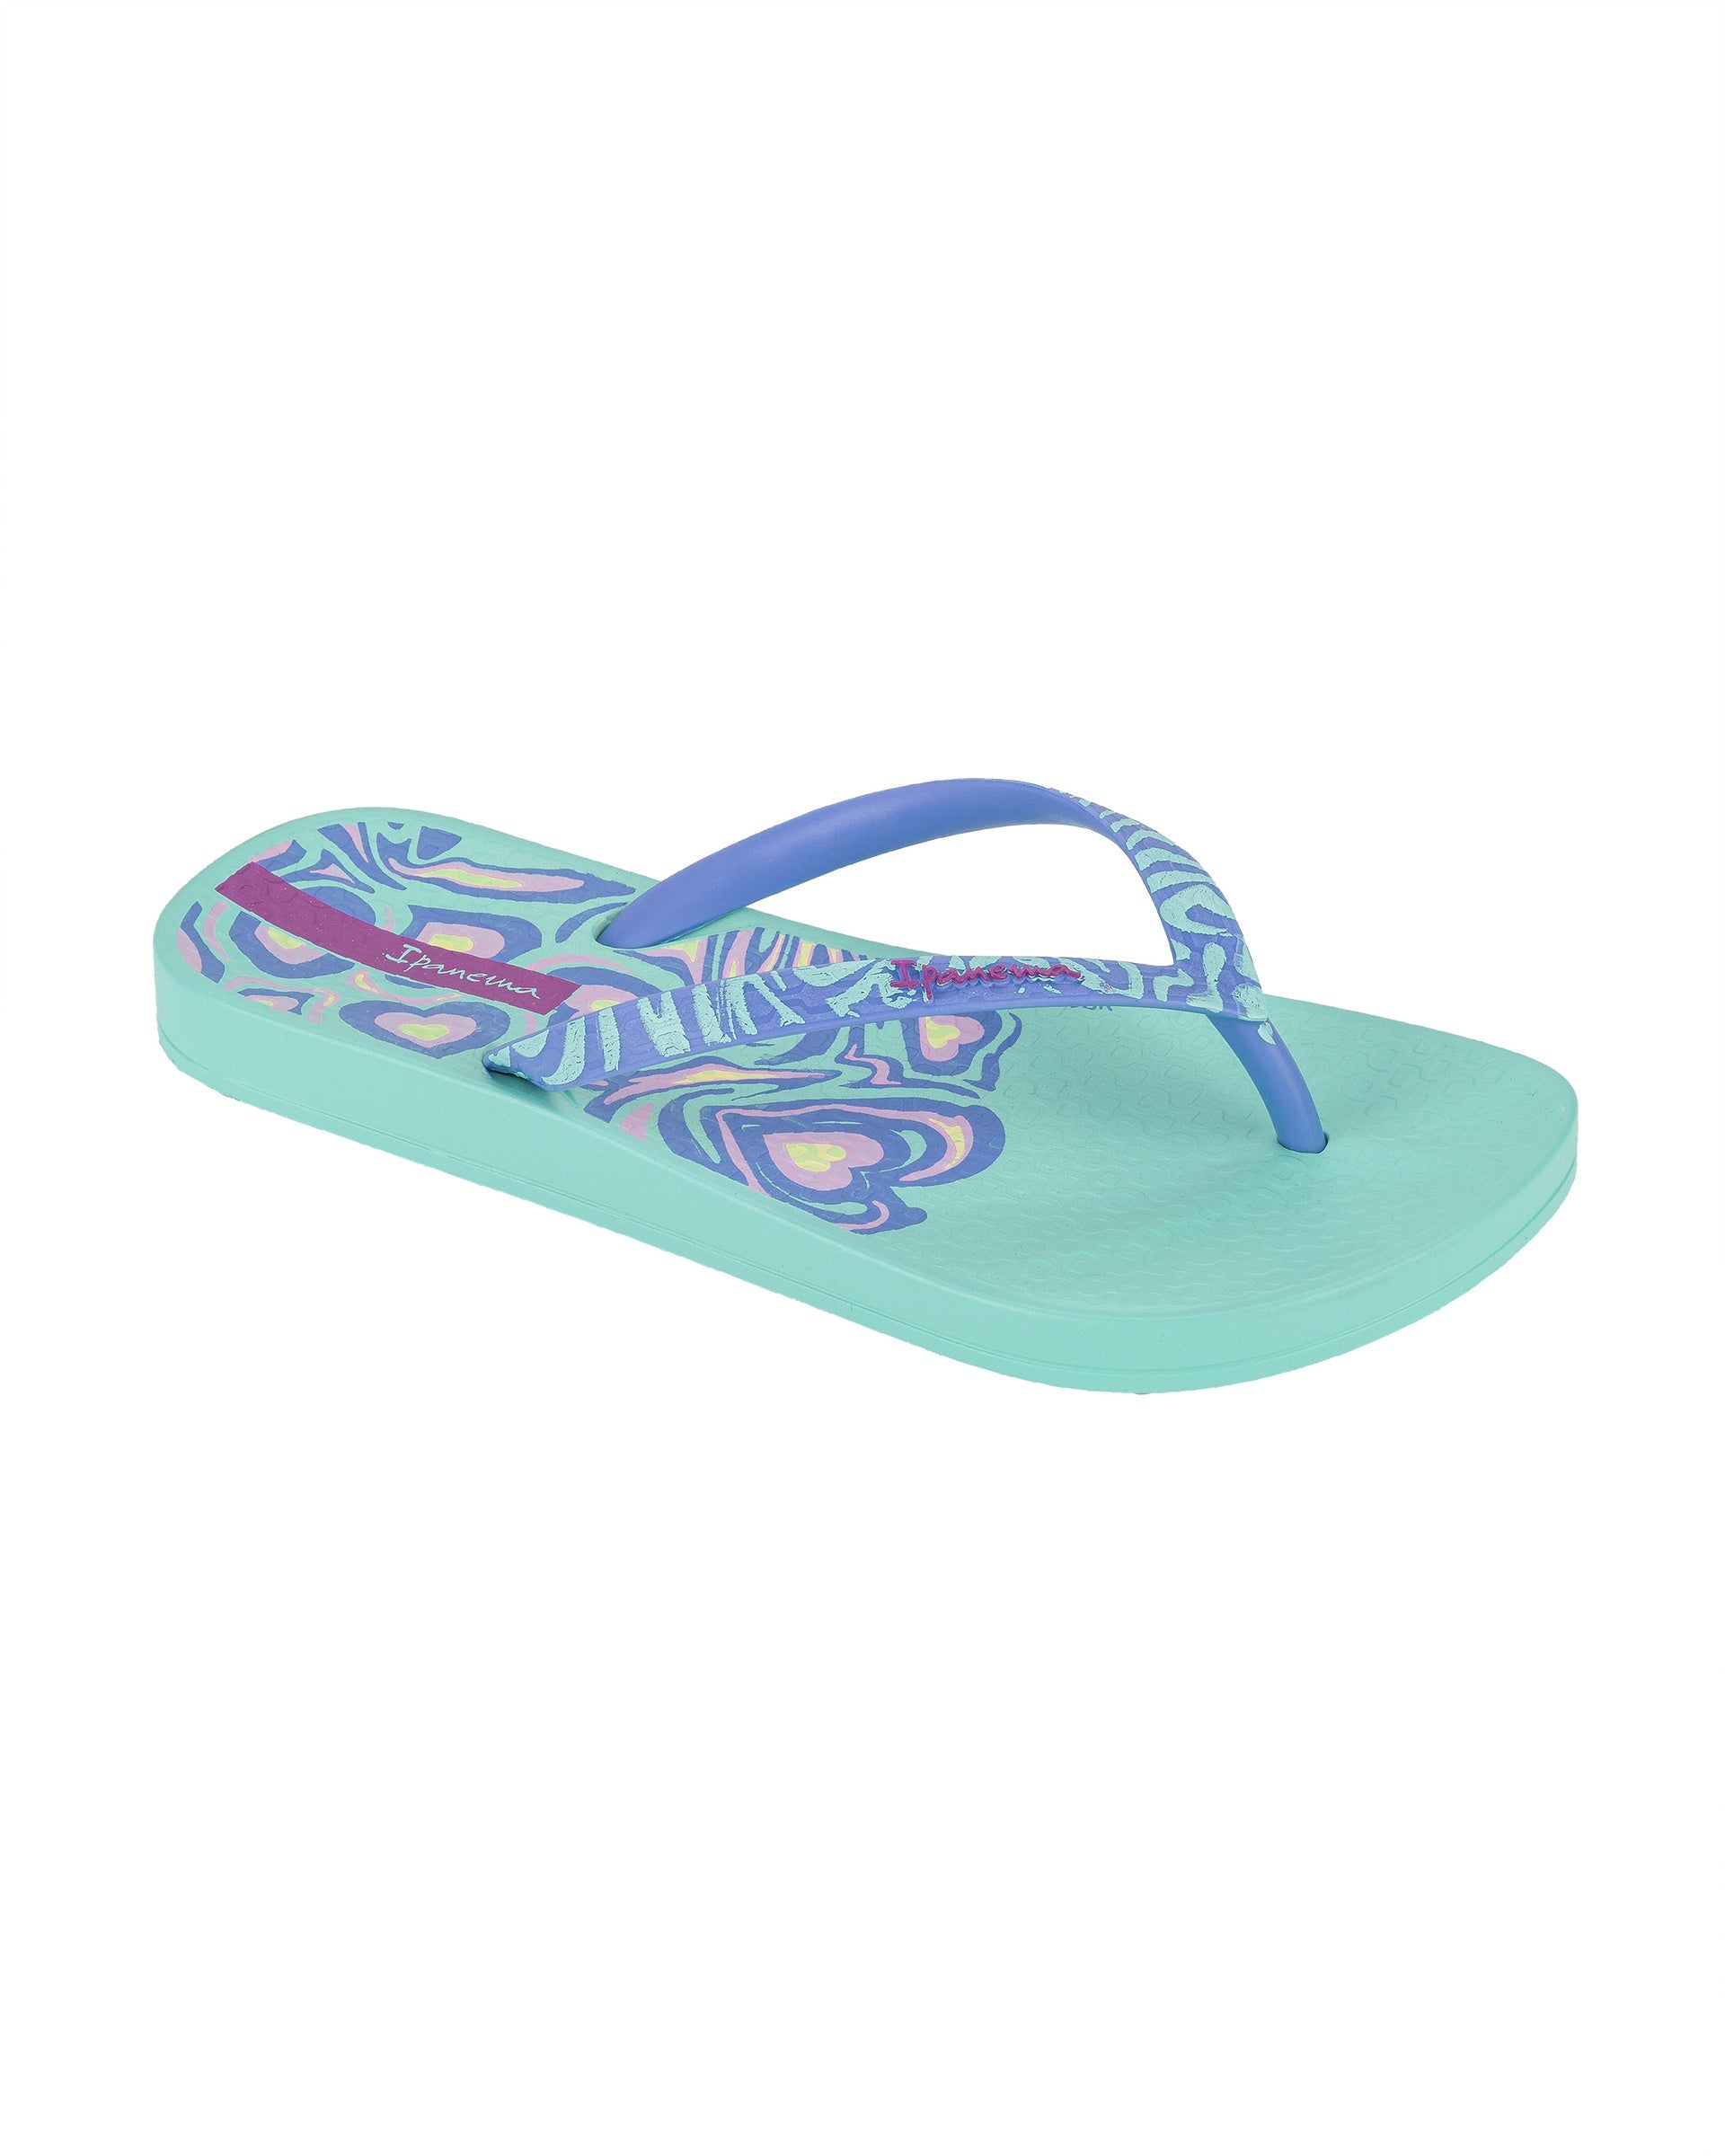 Angled view of a green Ipanema Nostalgic Hearts kid's flip flop with heart outlines on insole and blue strap.